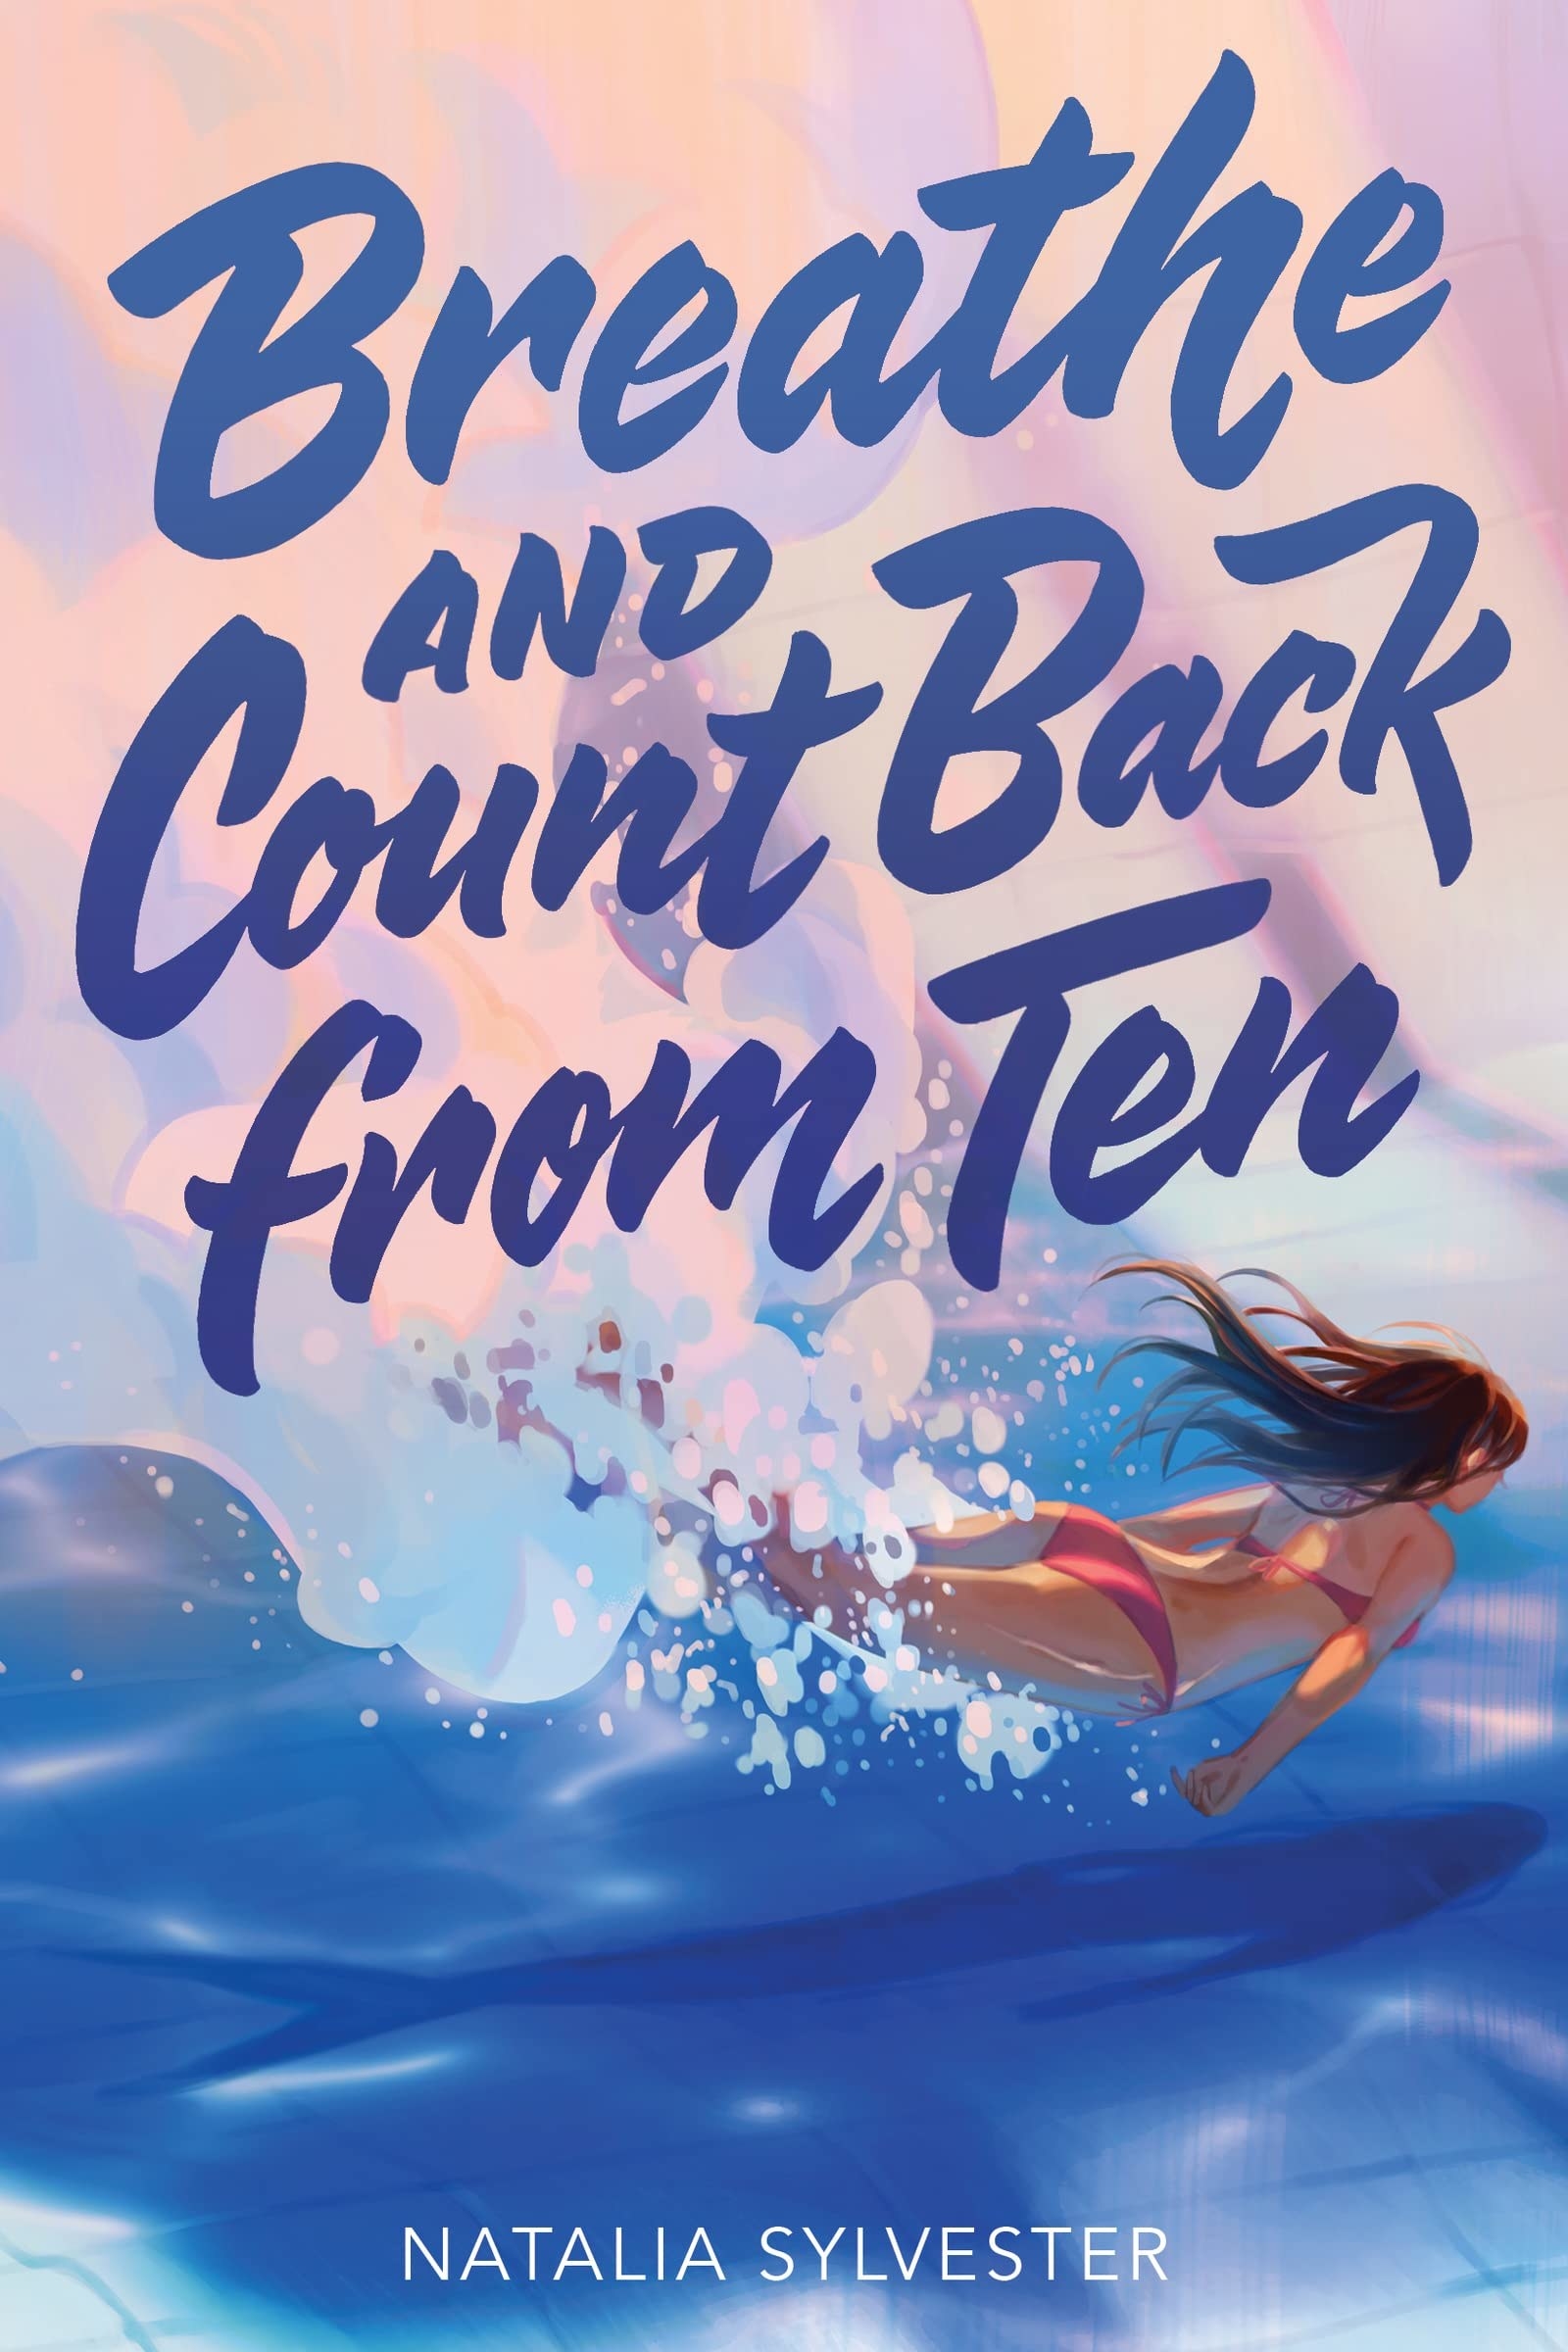 &quot;Breathe and Count Back from Ten&quot; cover illustration showing a woman swimming